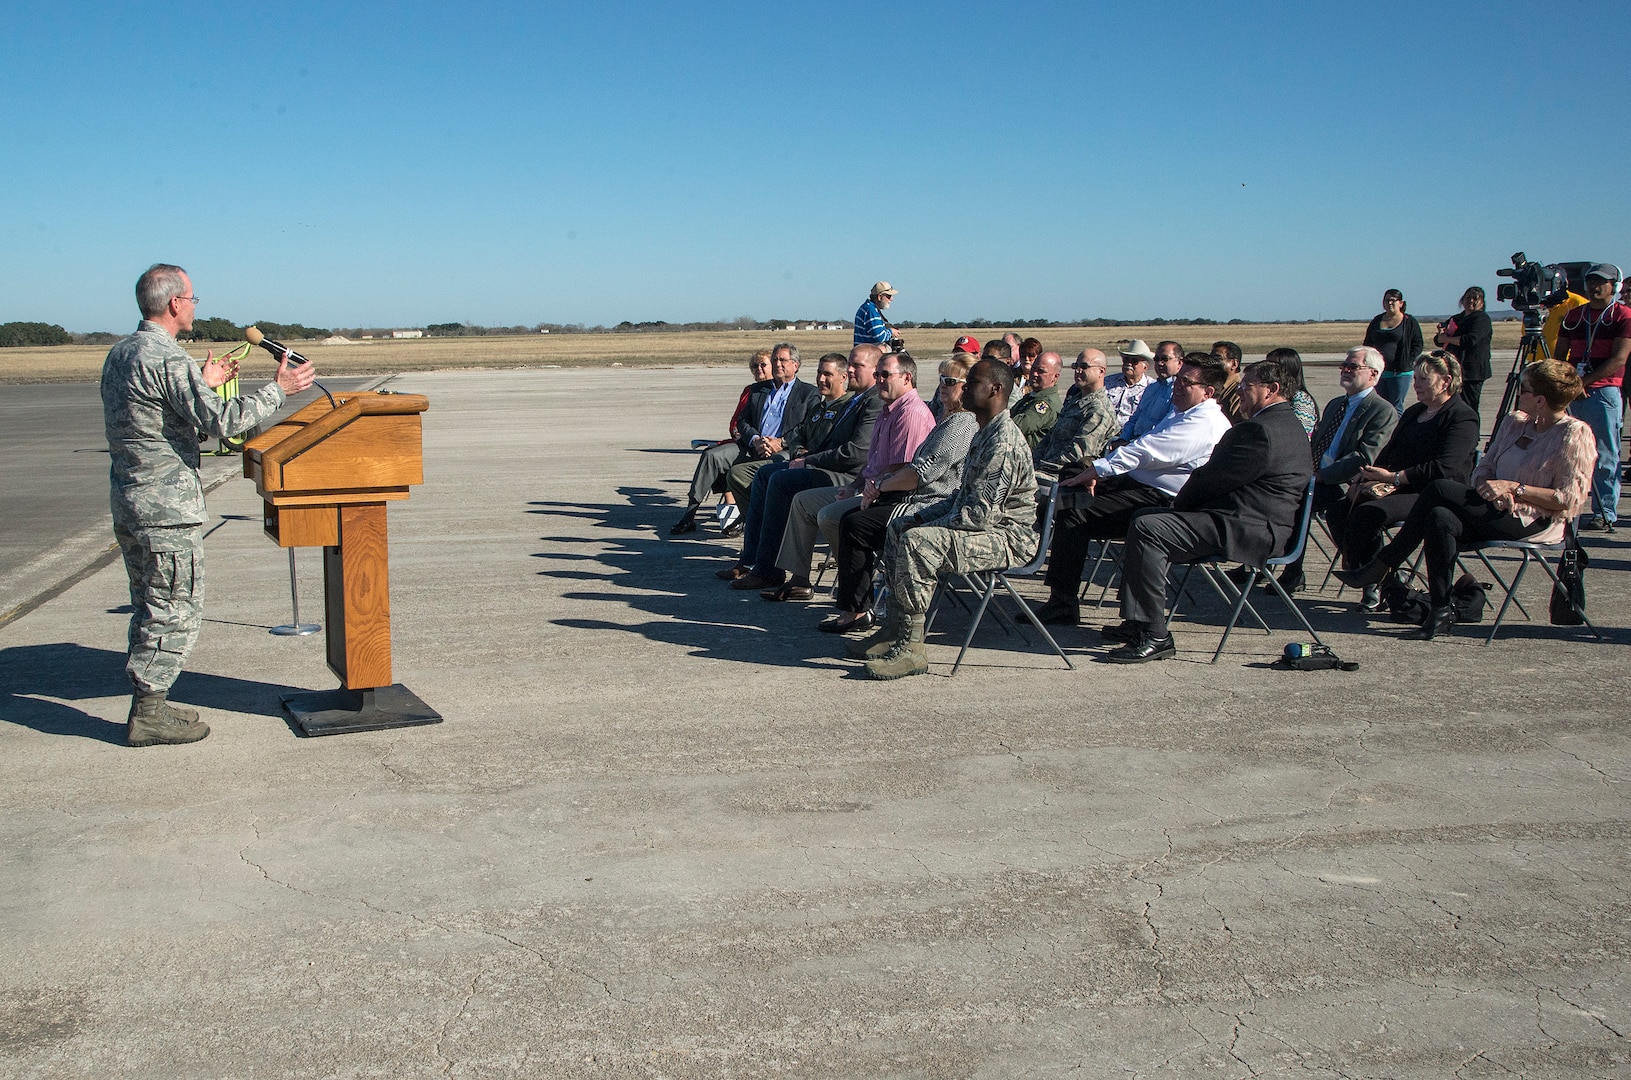 Brig. Gen. Bob LaBrutta, 502nd Air Base Wing and Joint Base San Antonio commander, addresses the crowd during a symbolic ribbon cutting event at Joint Base San Antonio-Randolph Seguin Auxiliary Airfield Jan. 20. The event signified the reopening of the airfield following a $12.4 million repaving and construction project that included replacing and grading the entire airfield, stabilizing existing soils, and constructing a new taxiway, parking apron and emergency access road.  (U.S. Air Force photo by Johnny Saldivar)